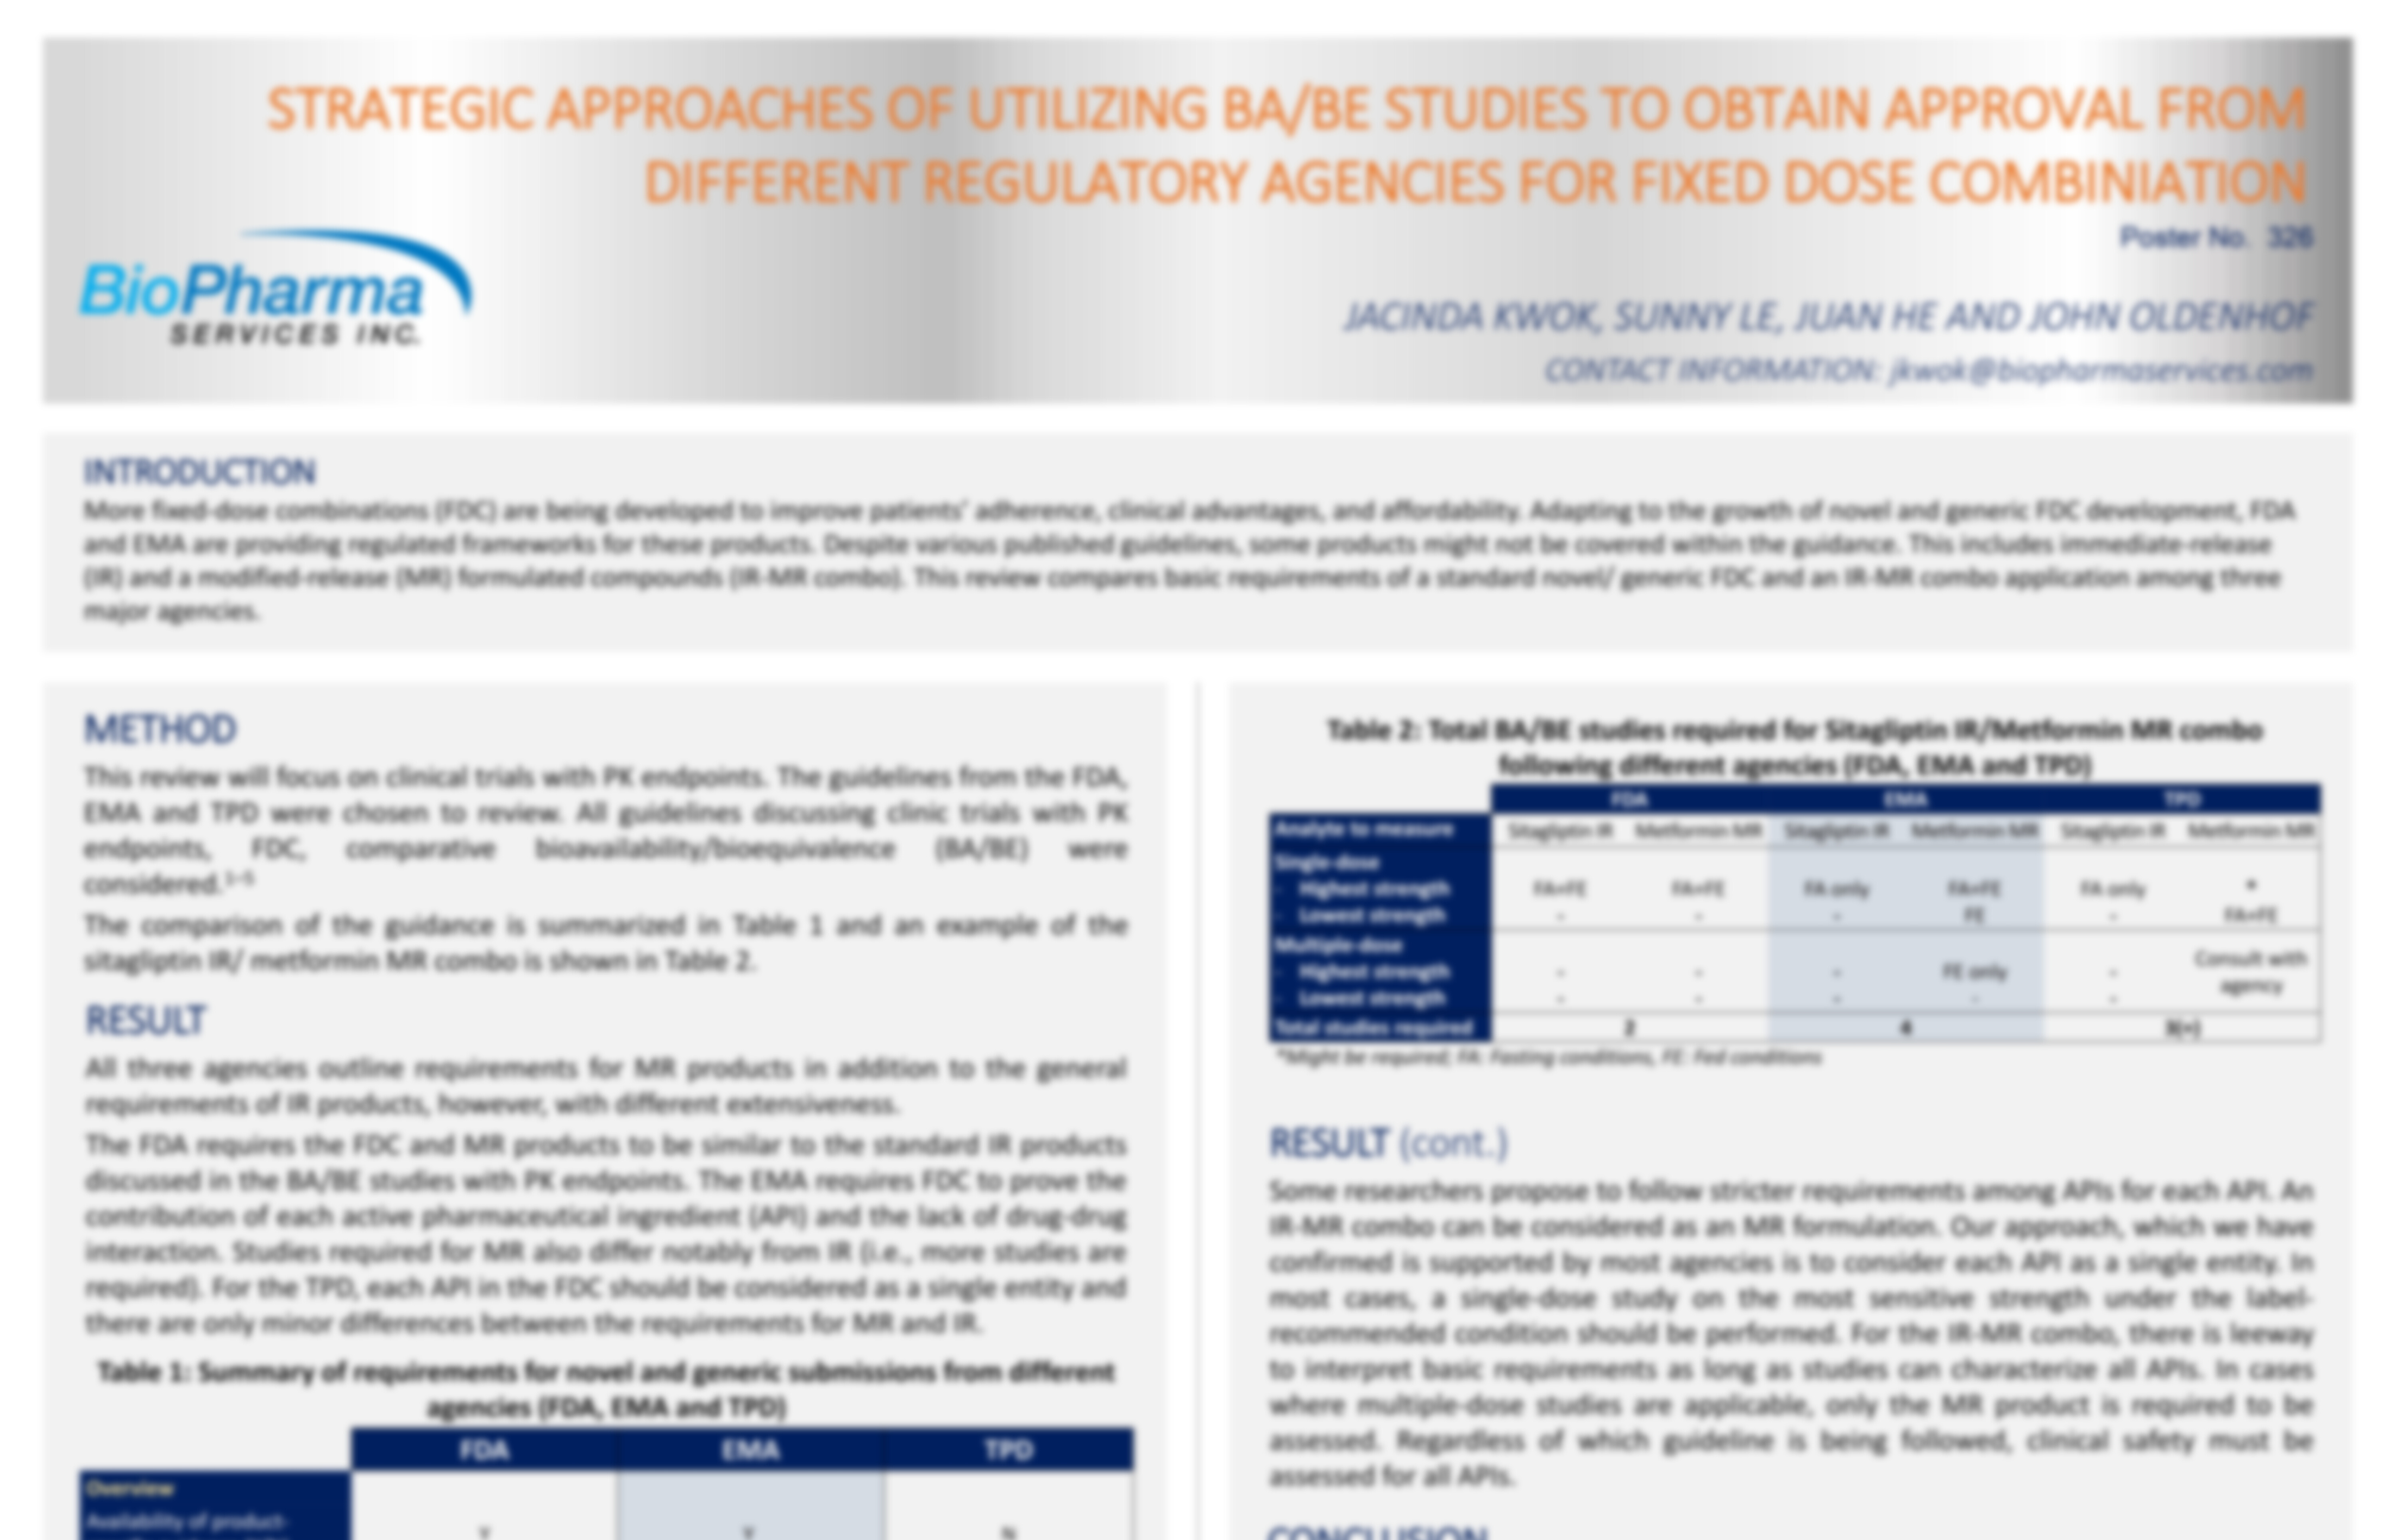 STRATEGIC APPROACHES OF UTILIZING BA/BE STUDIES TO OBTAIN APPROVAL image.